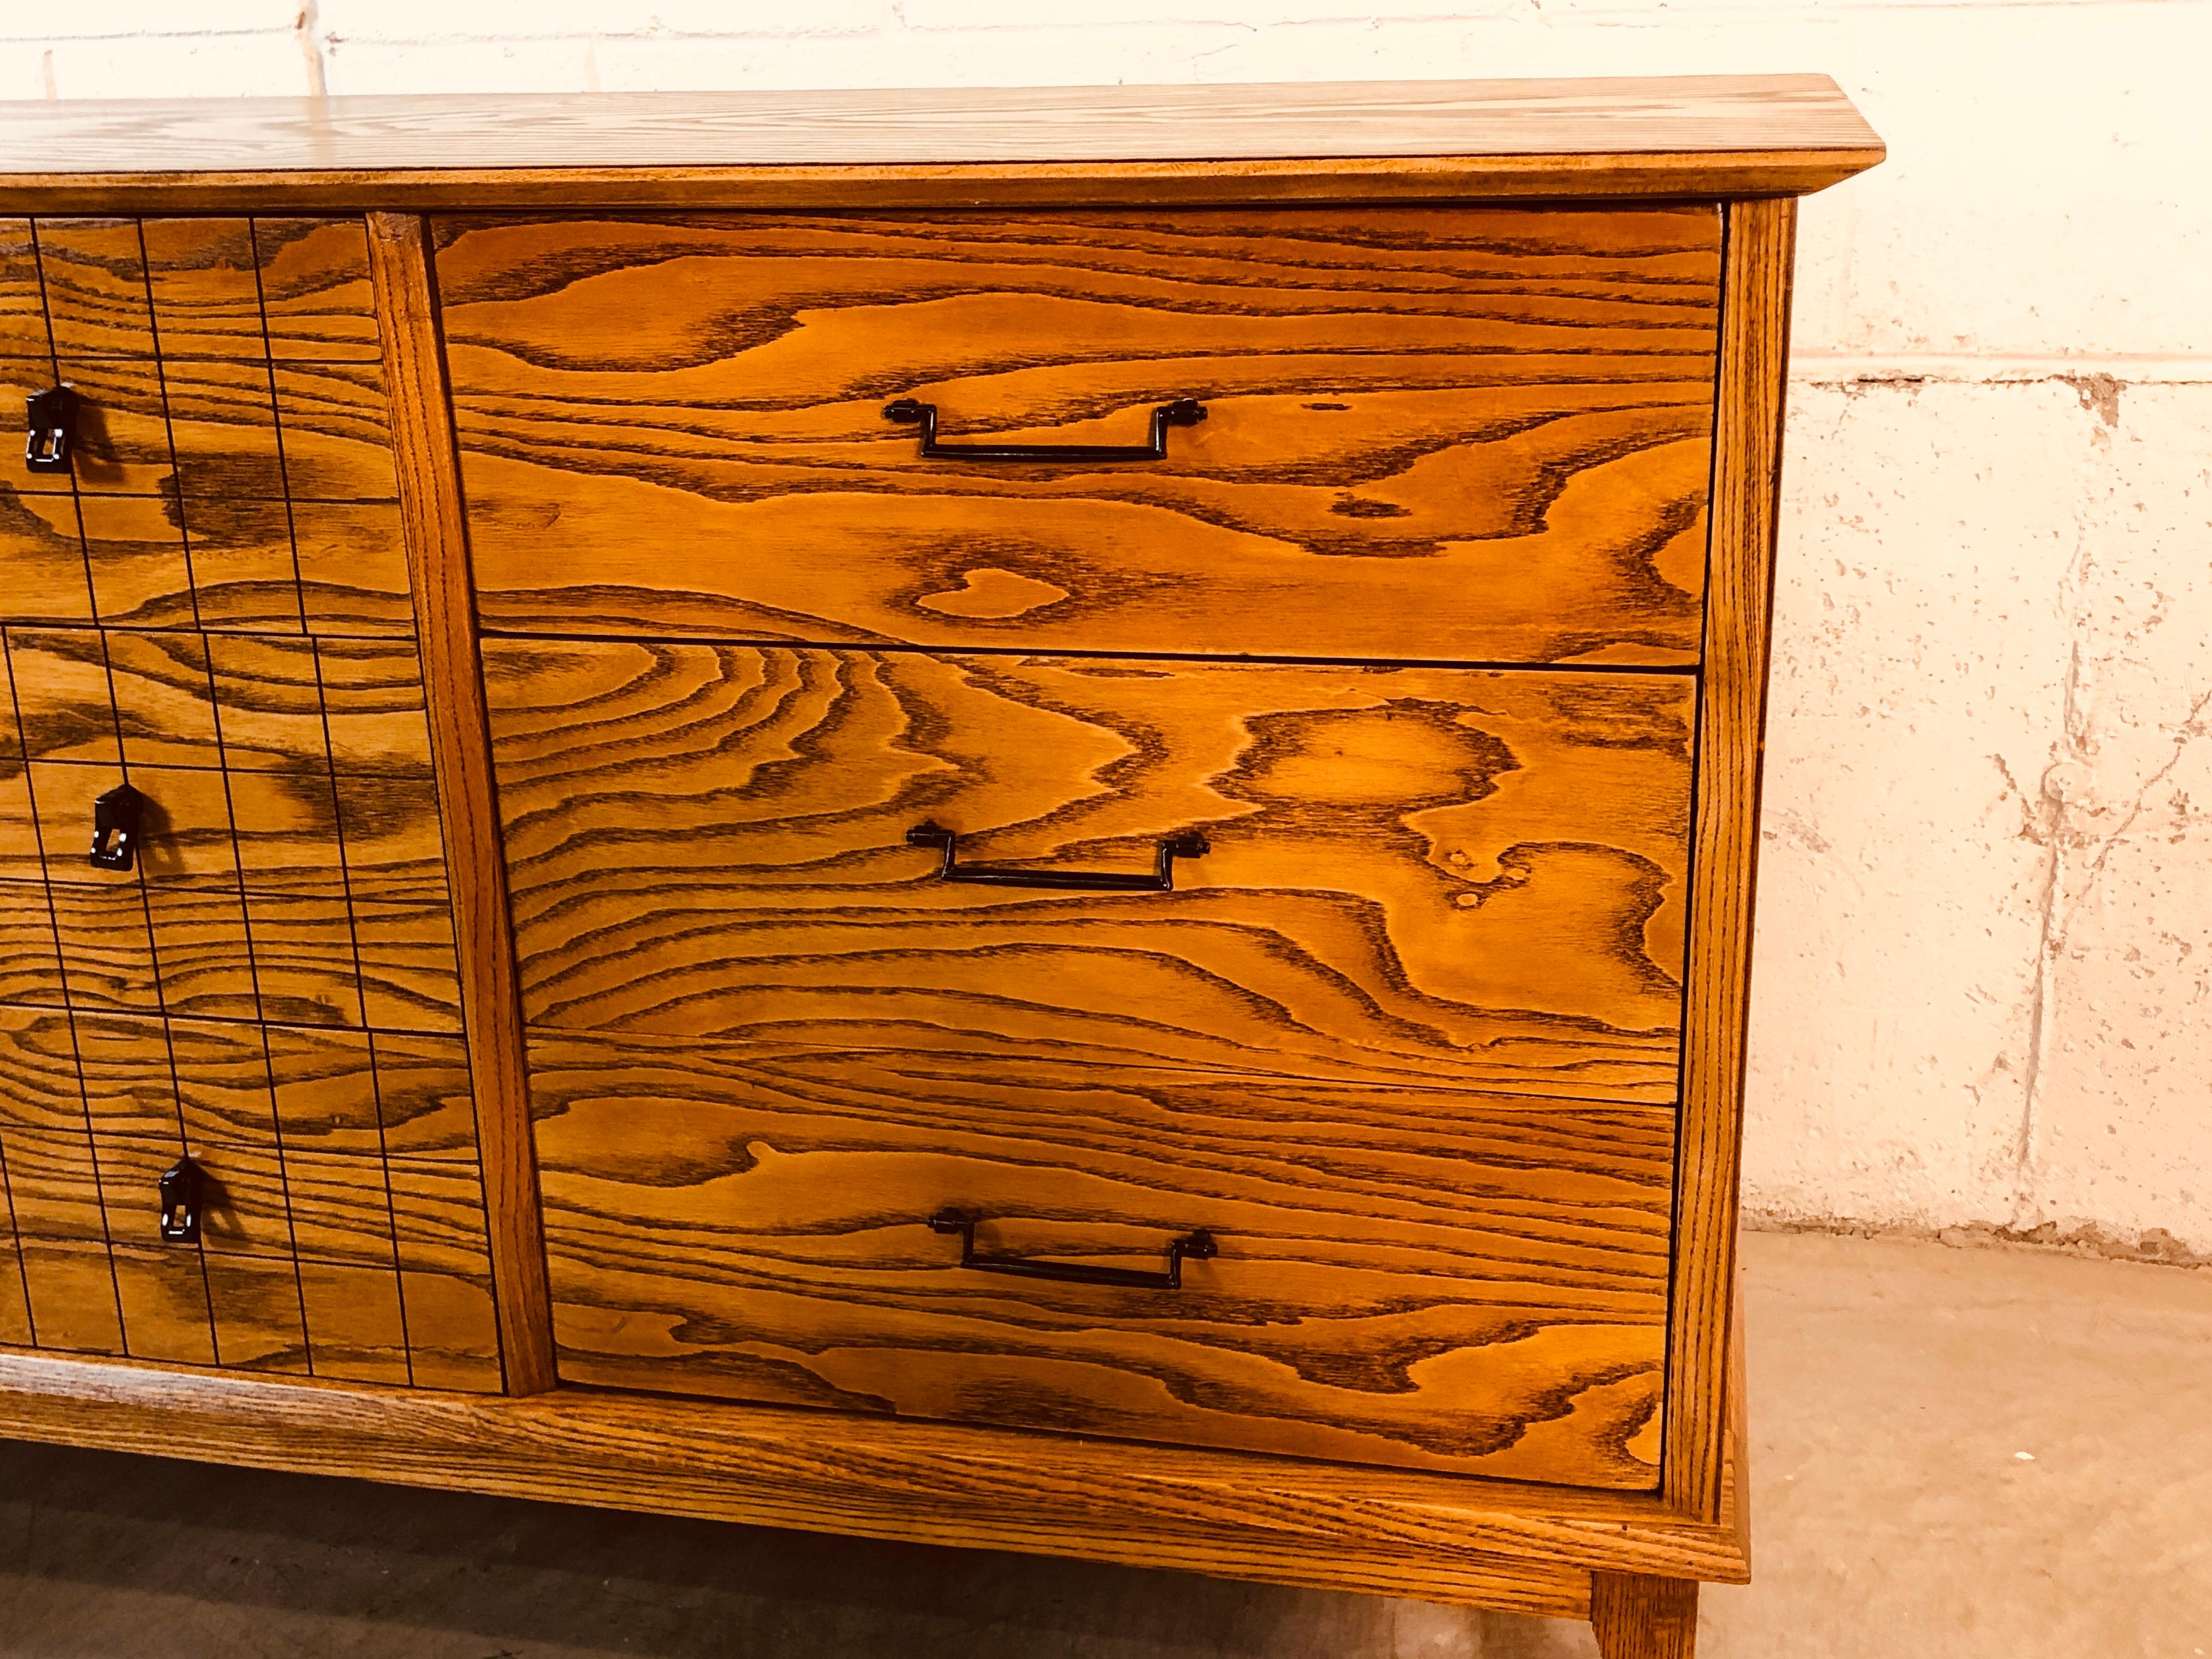 1960s Oakwood Dresser with Dark Grain In Good Condition For Sale In Amherst, NH